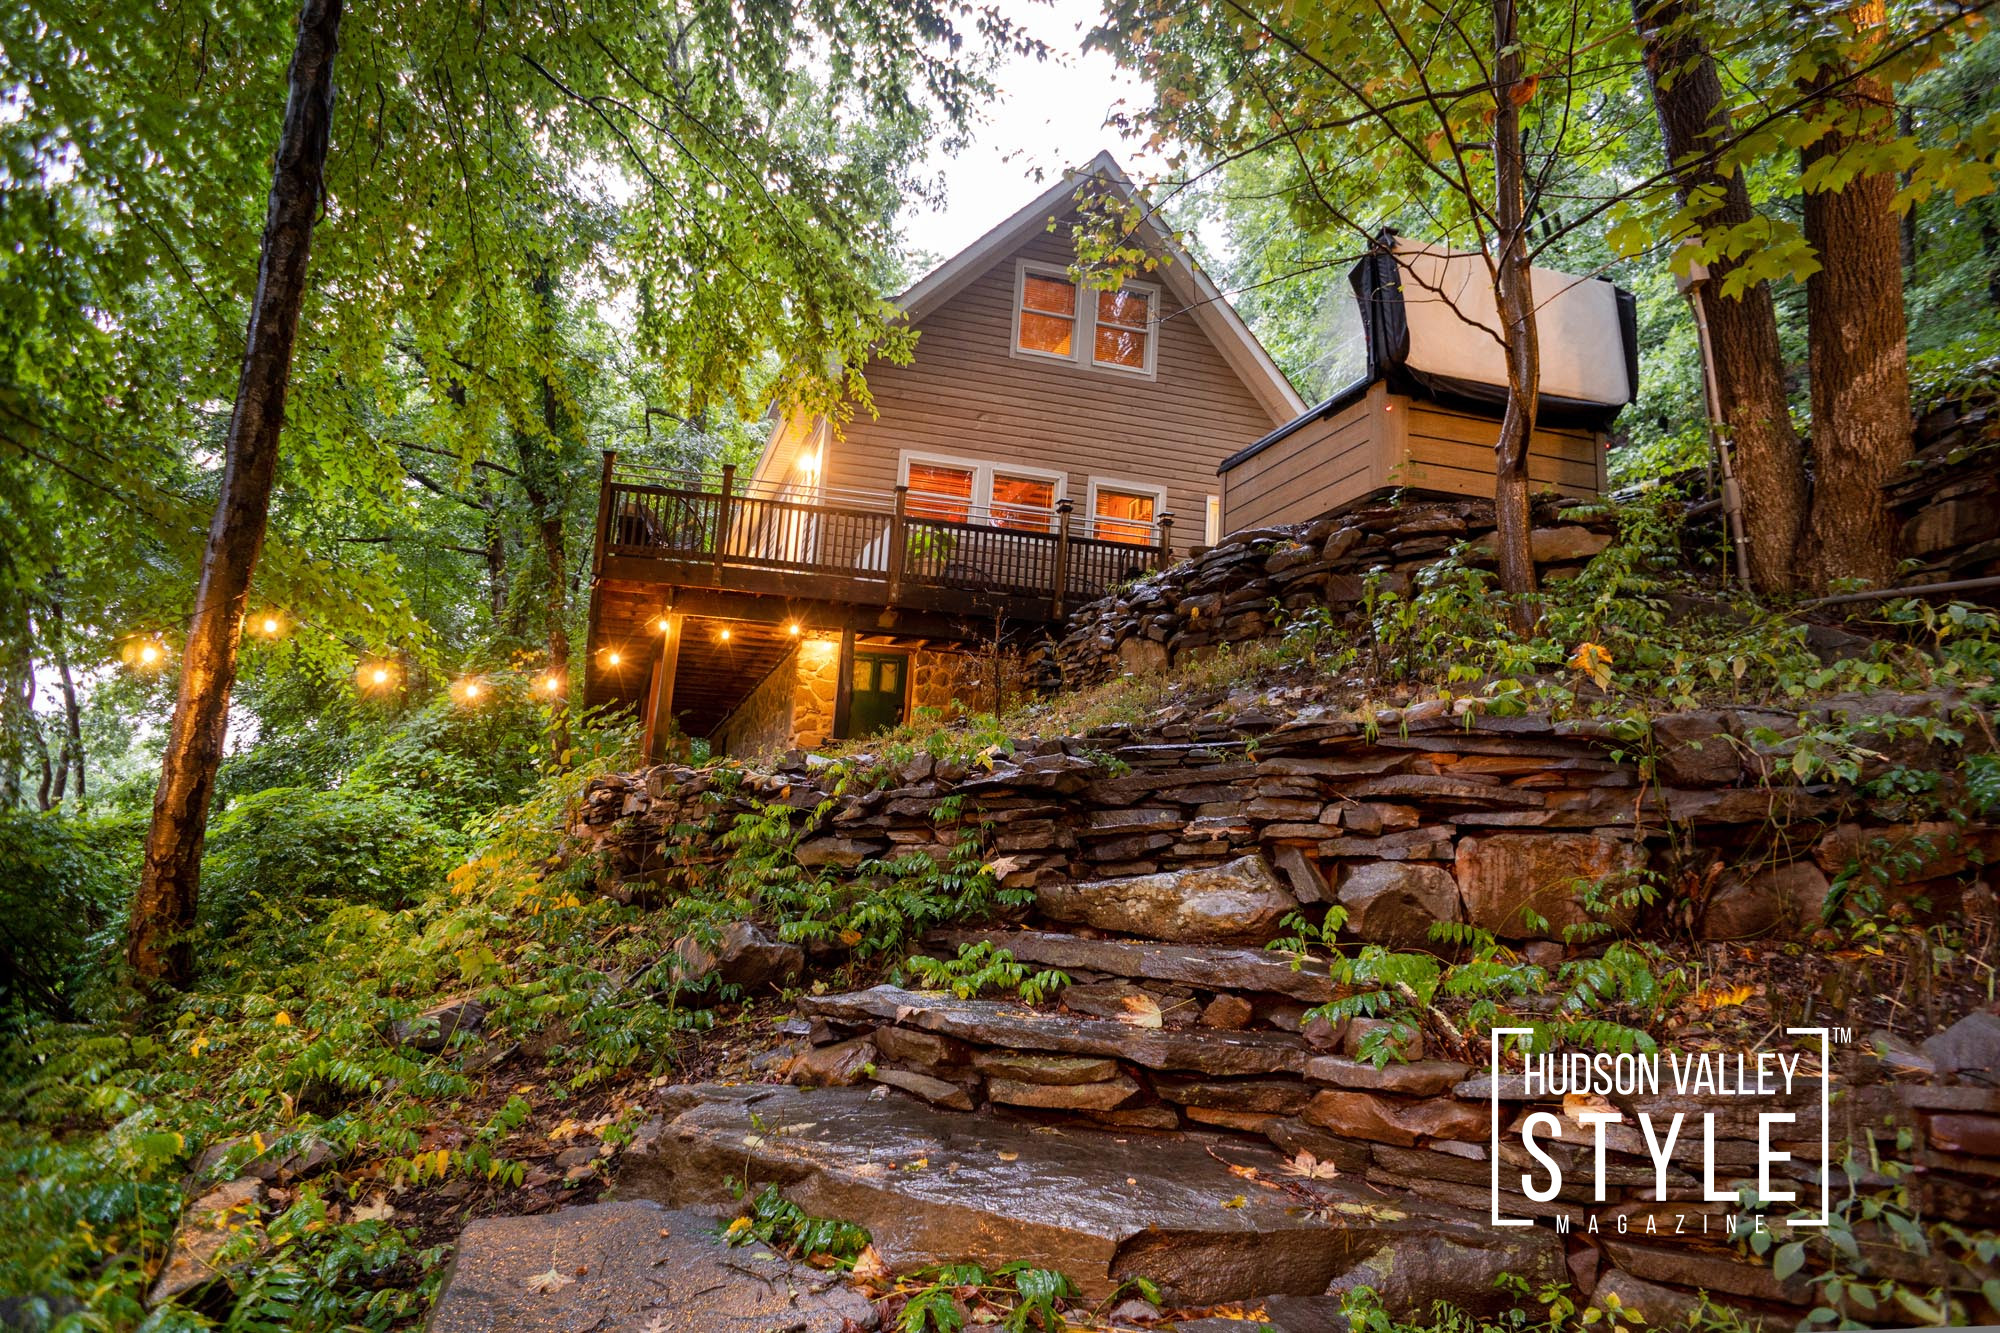 Connect with Nature and Unwind at the Hawks Nest Cabin Overlooking Delaware River